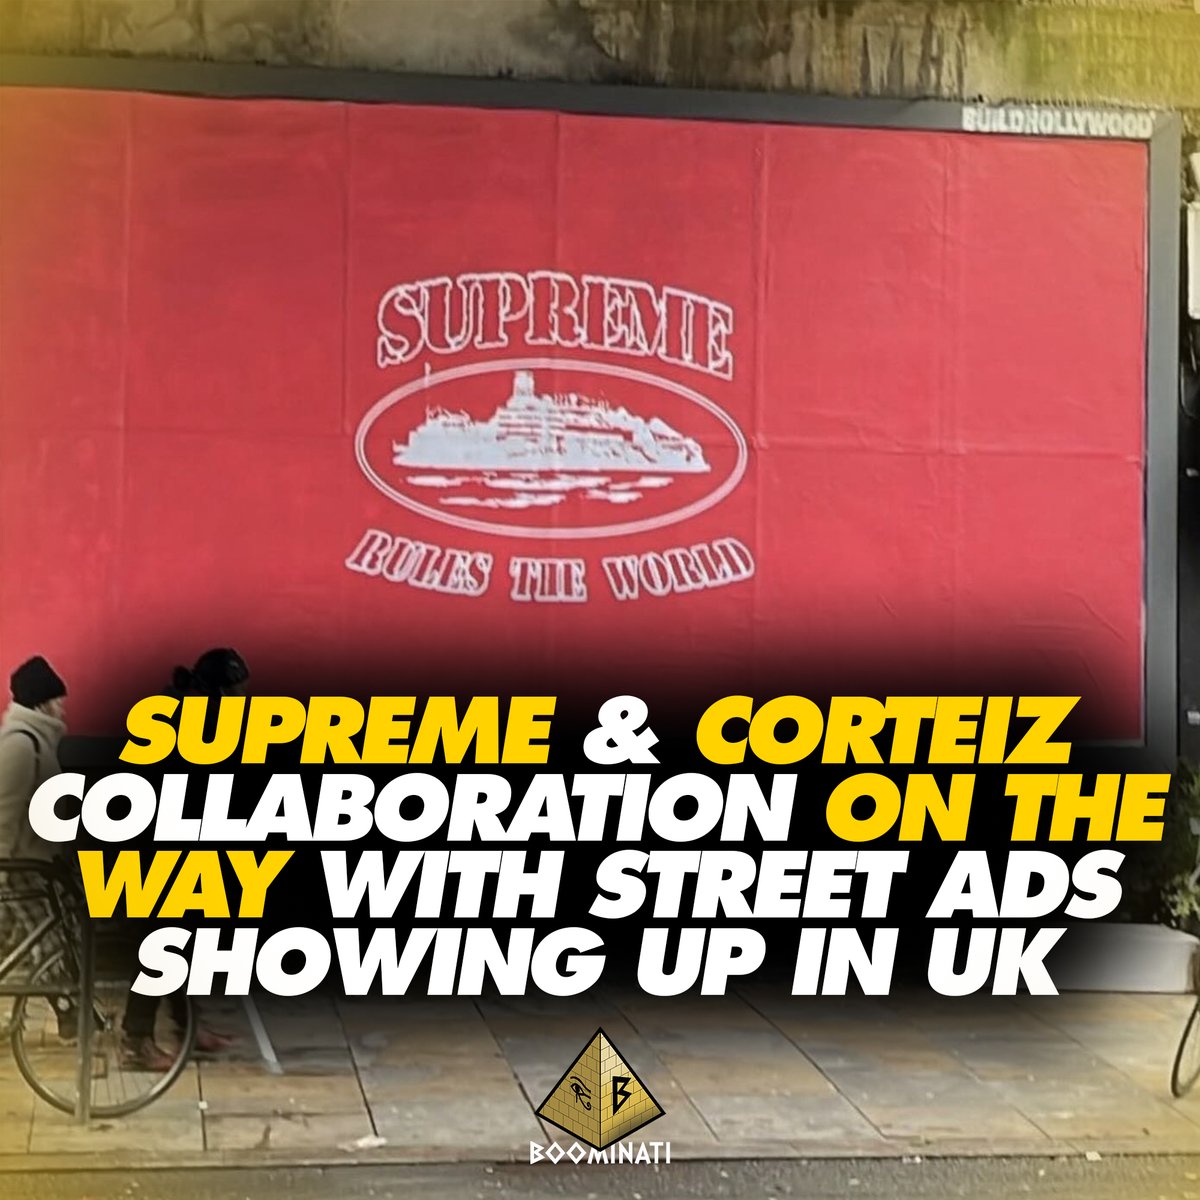 A collaboration between Supreme & Corteiz is rumored to be on the way with London posters appearing 🤯 Are you excited about this news?